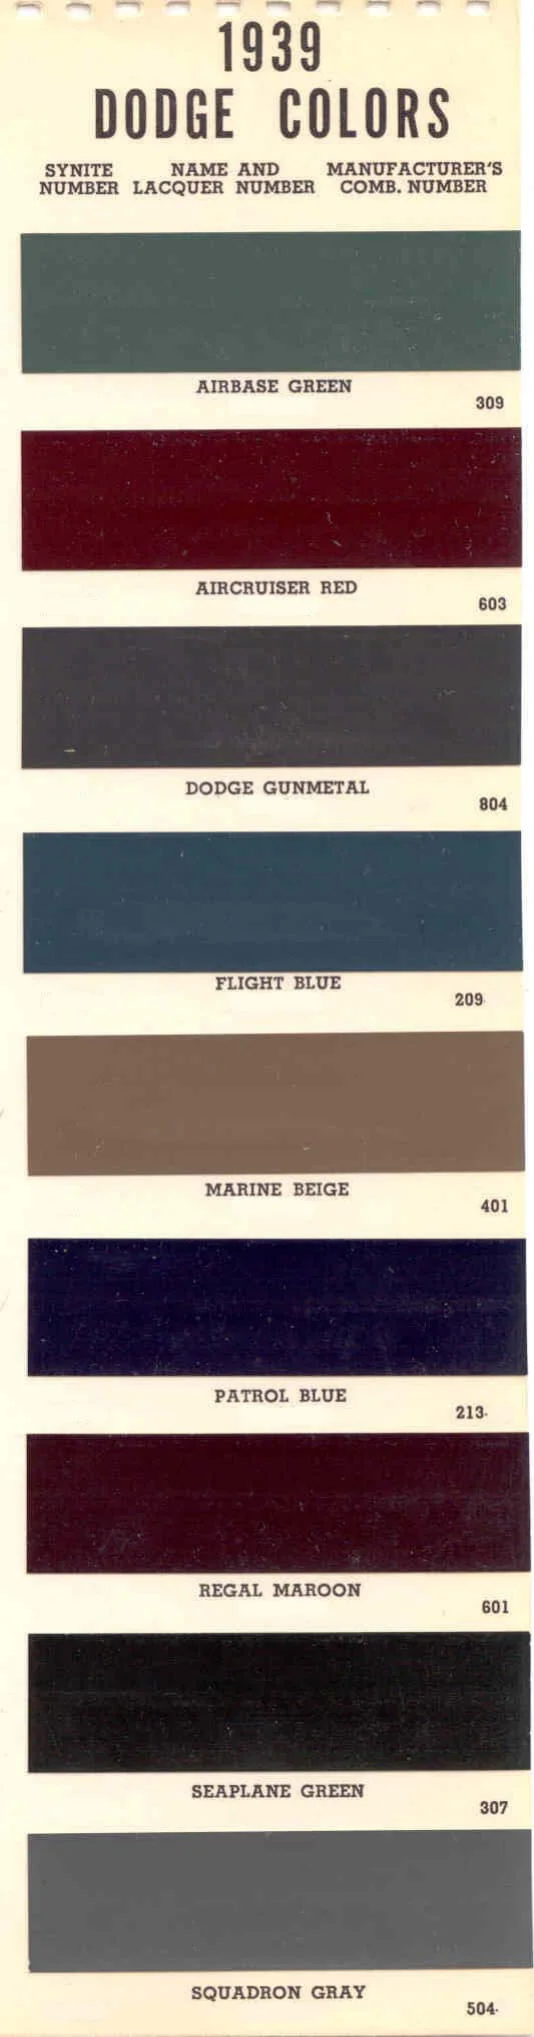 Summary Of Colors used on all Dodge Vehicles in 1939